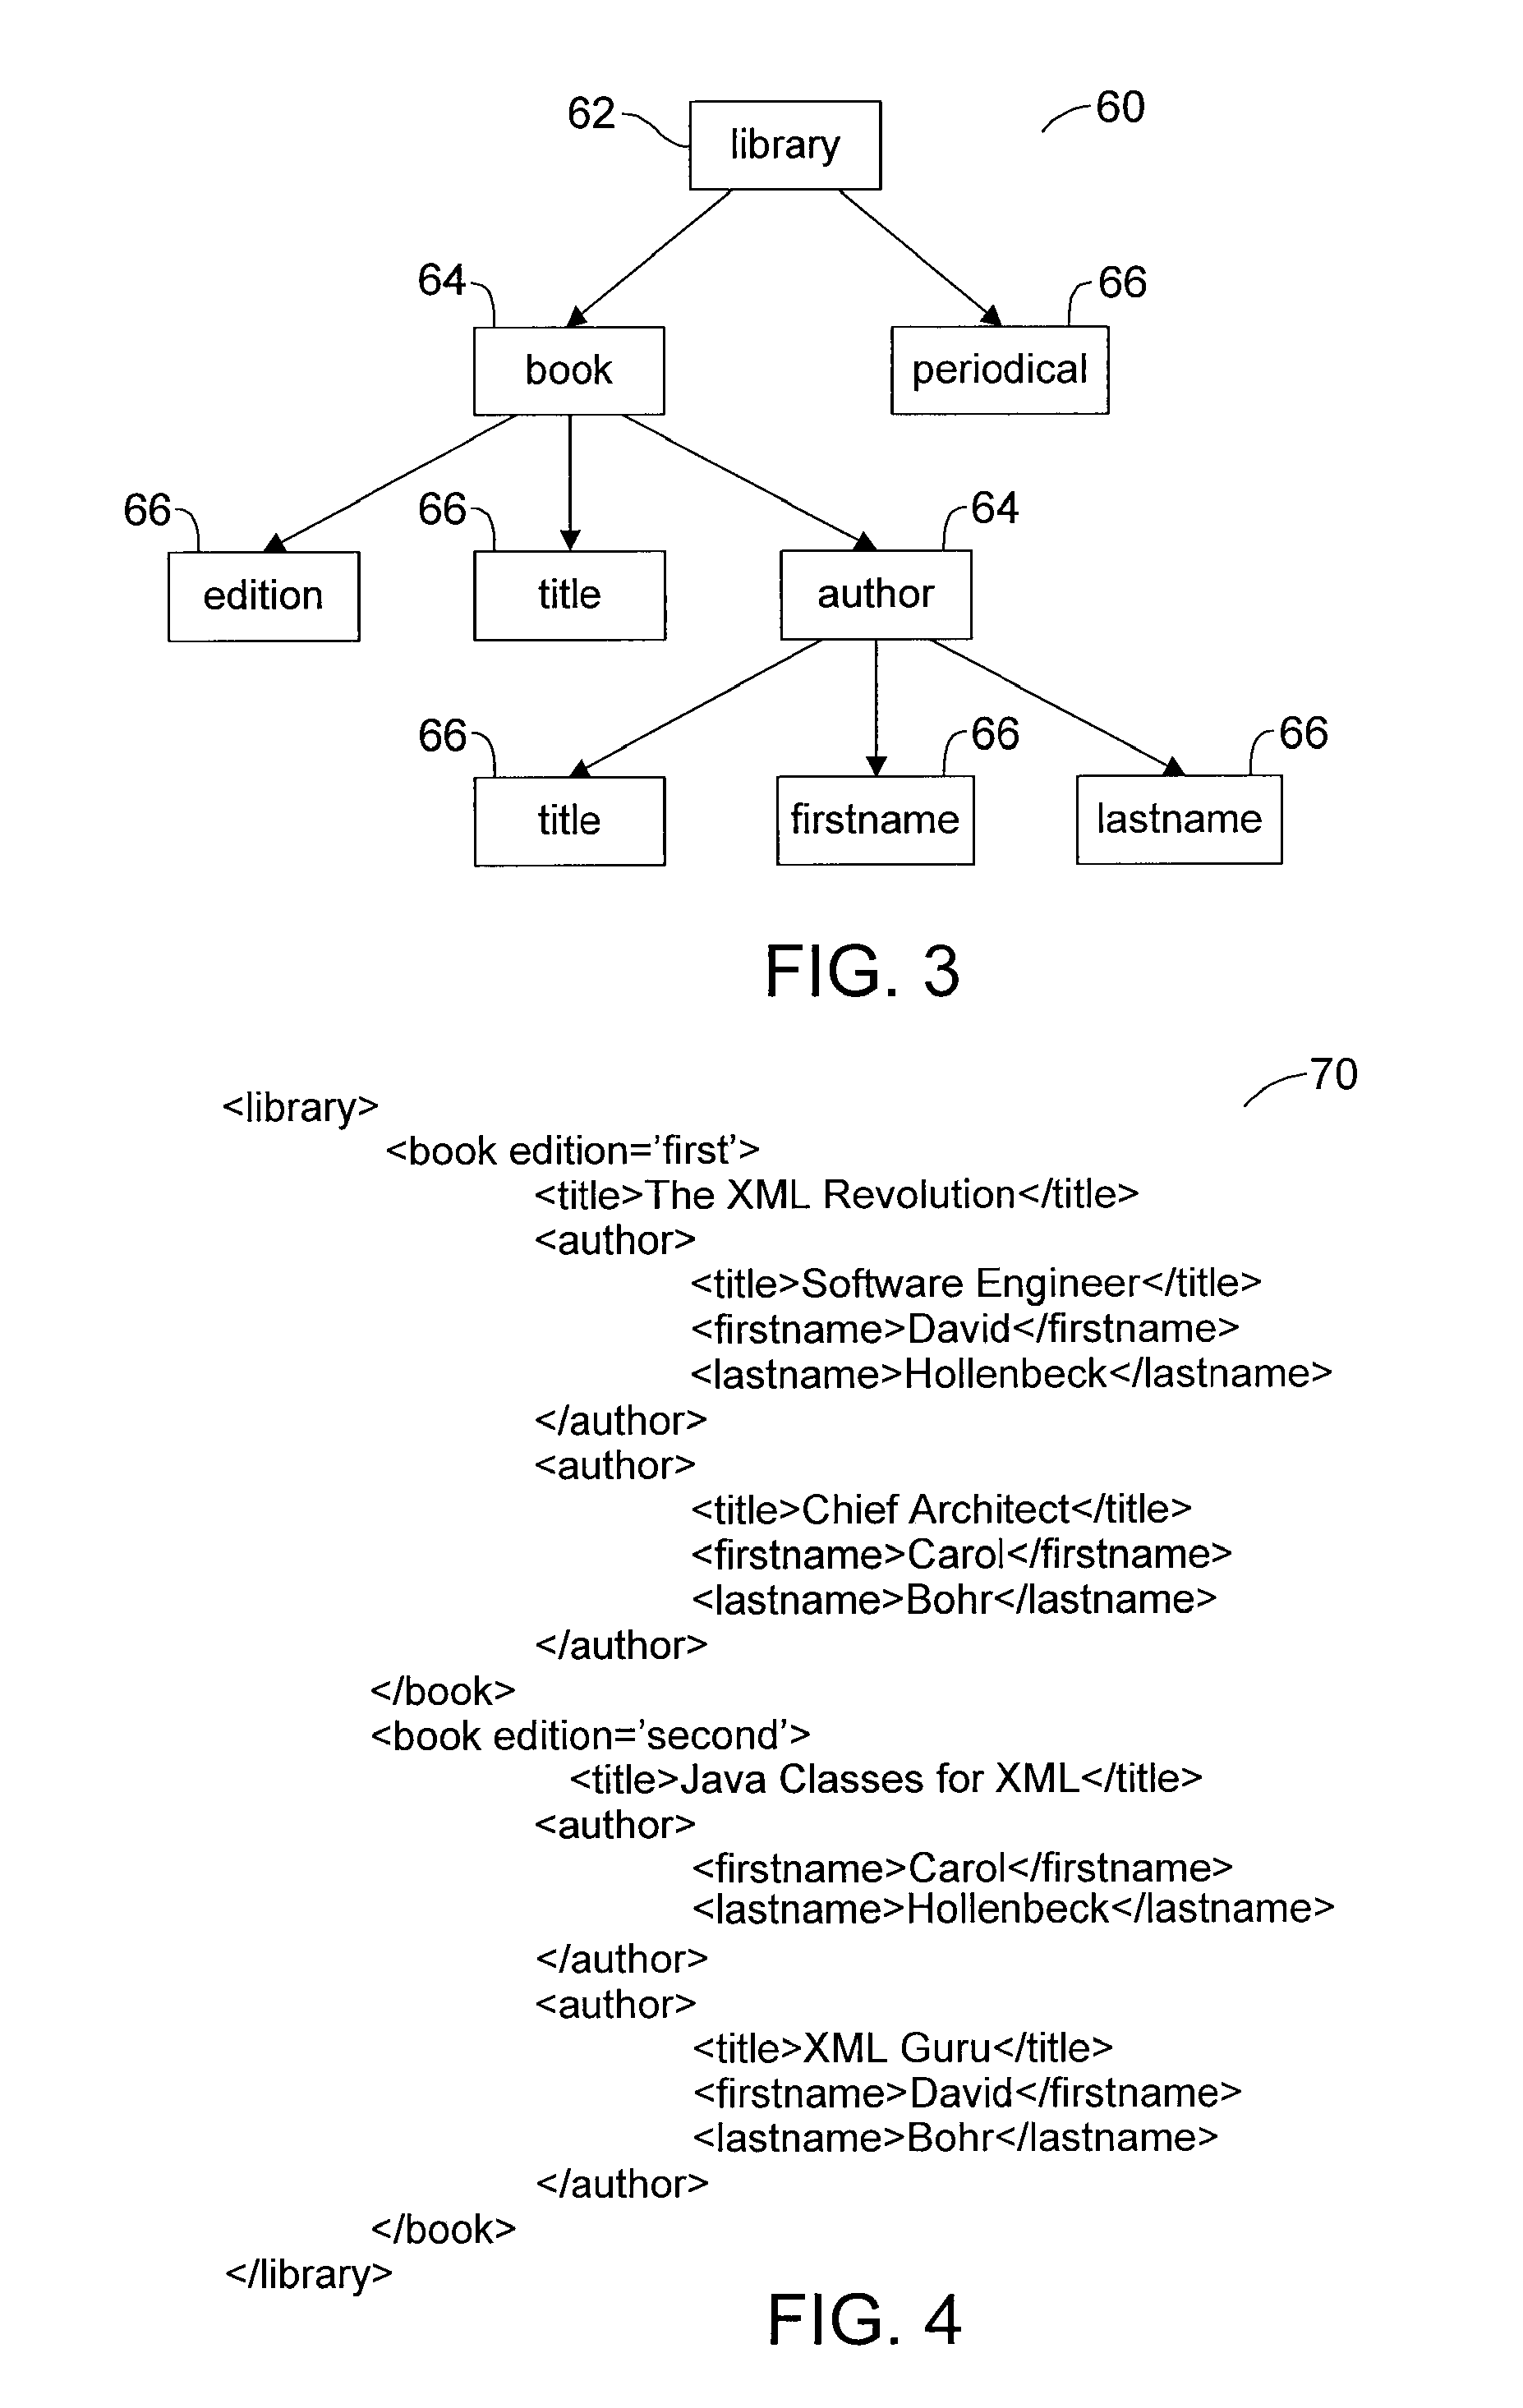 System and method for the storage, indexing and retrieval of XML documents using relational databases